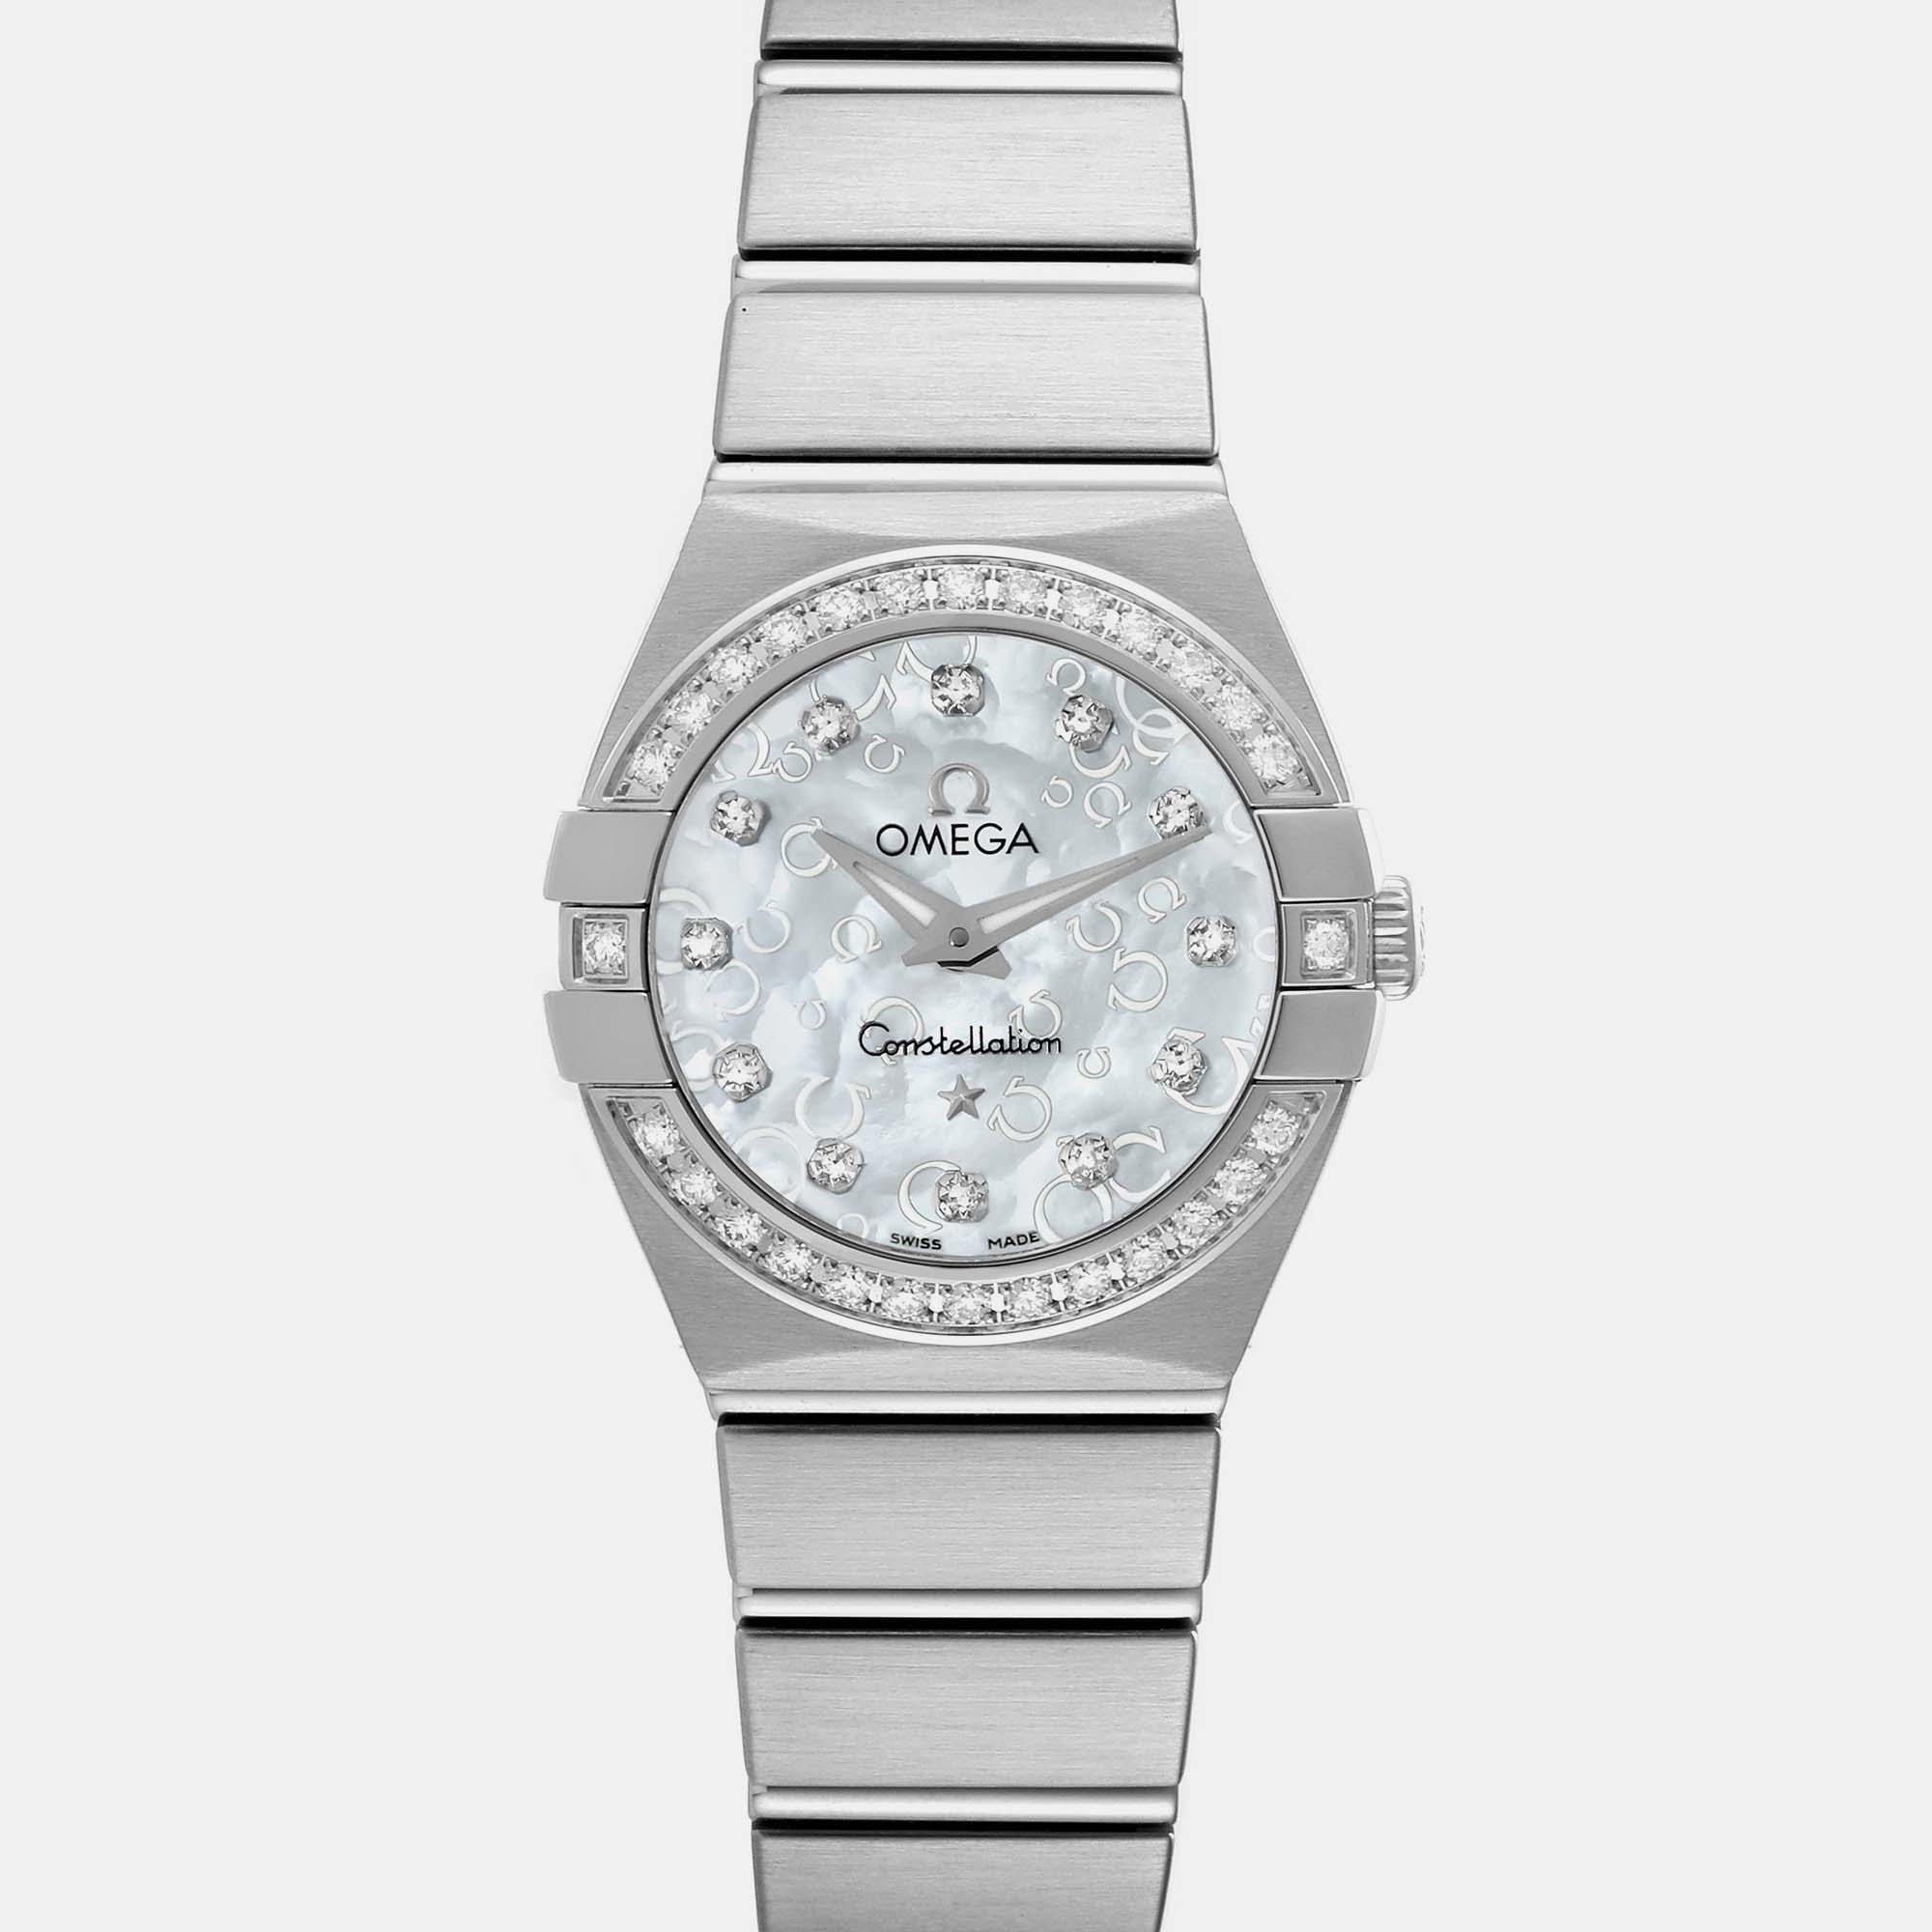 Omega Mother Of Pearl Diamond Stainless Steel Constellation 123.15.24.60.52.001 Quartz Women's Wristwatch 24 Mm